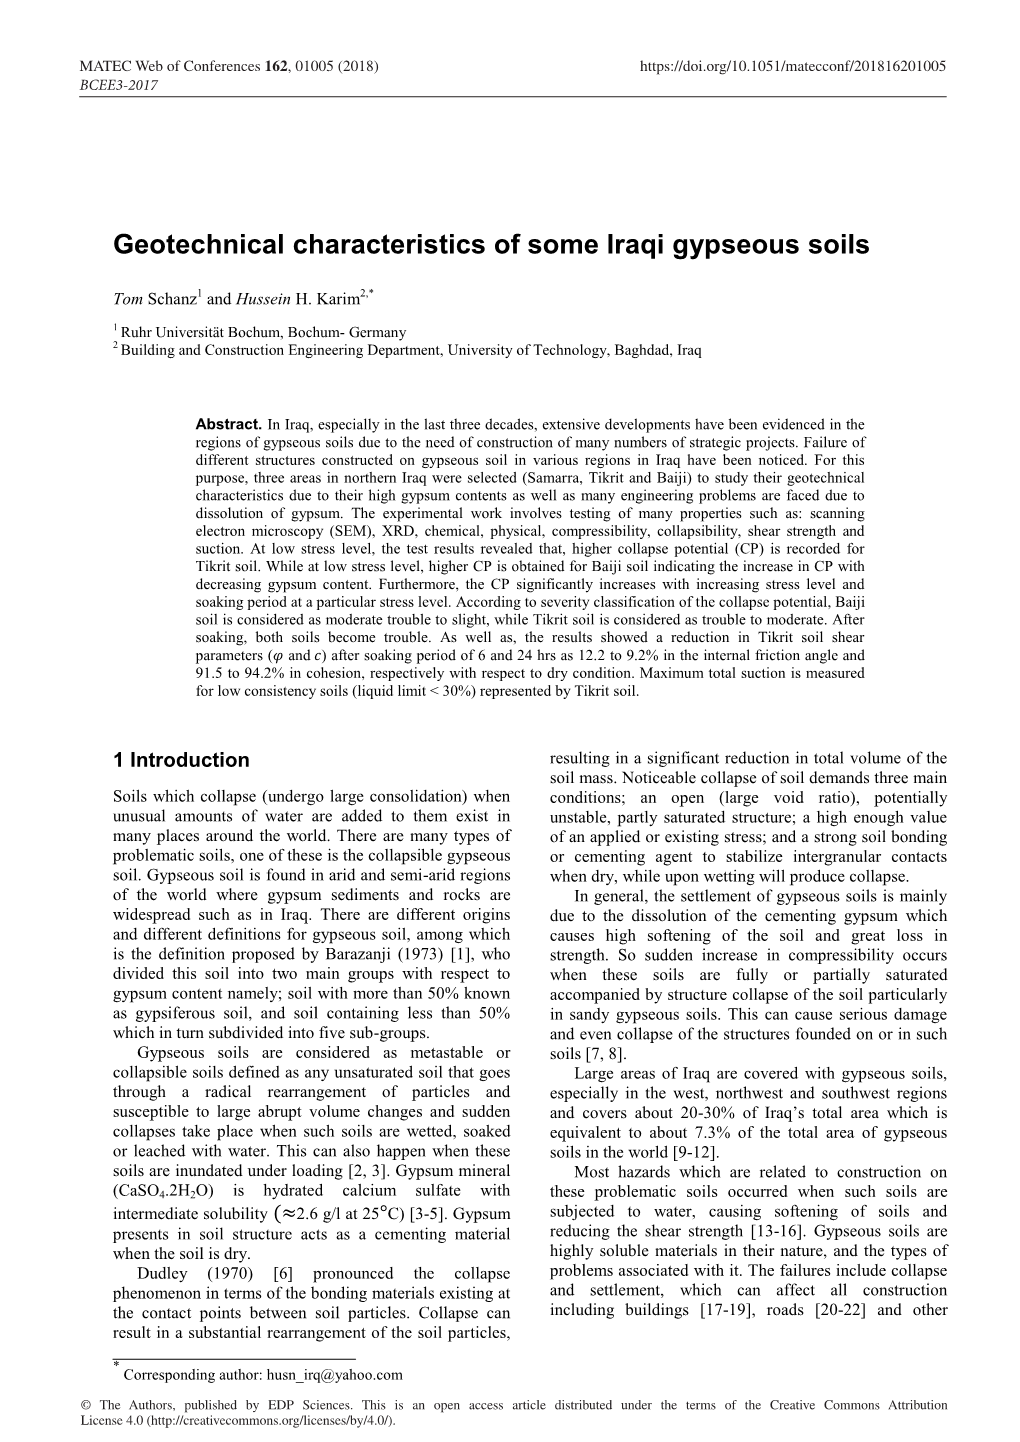 Geotechnical Characteristics of Some Iraqi Gypseous Soils